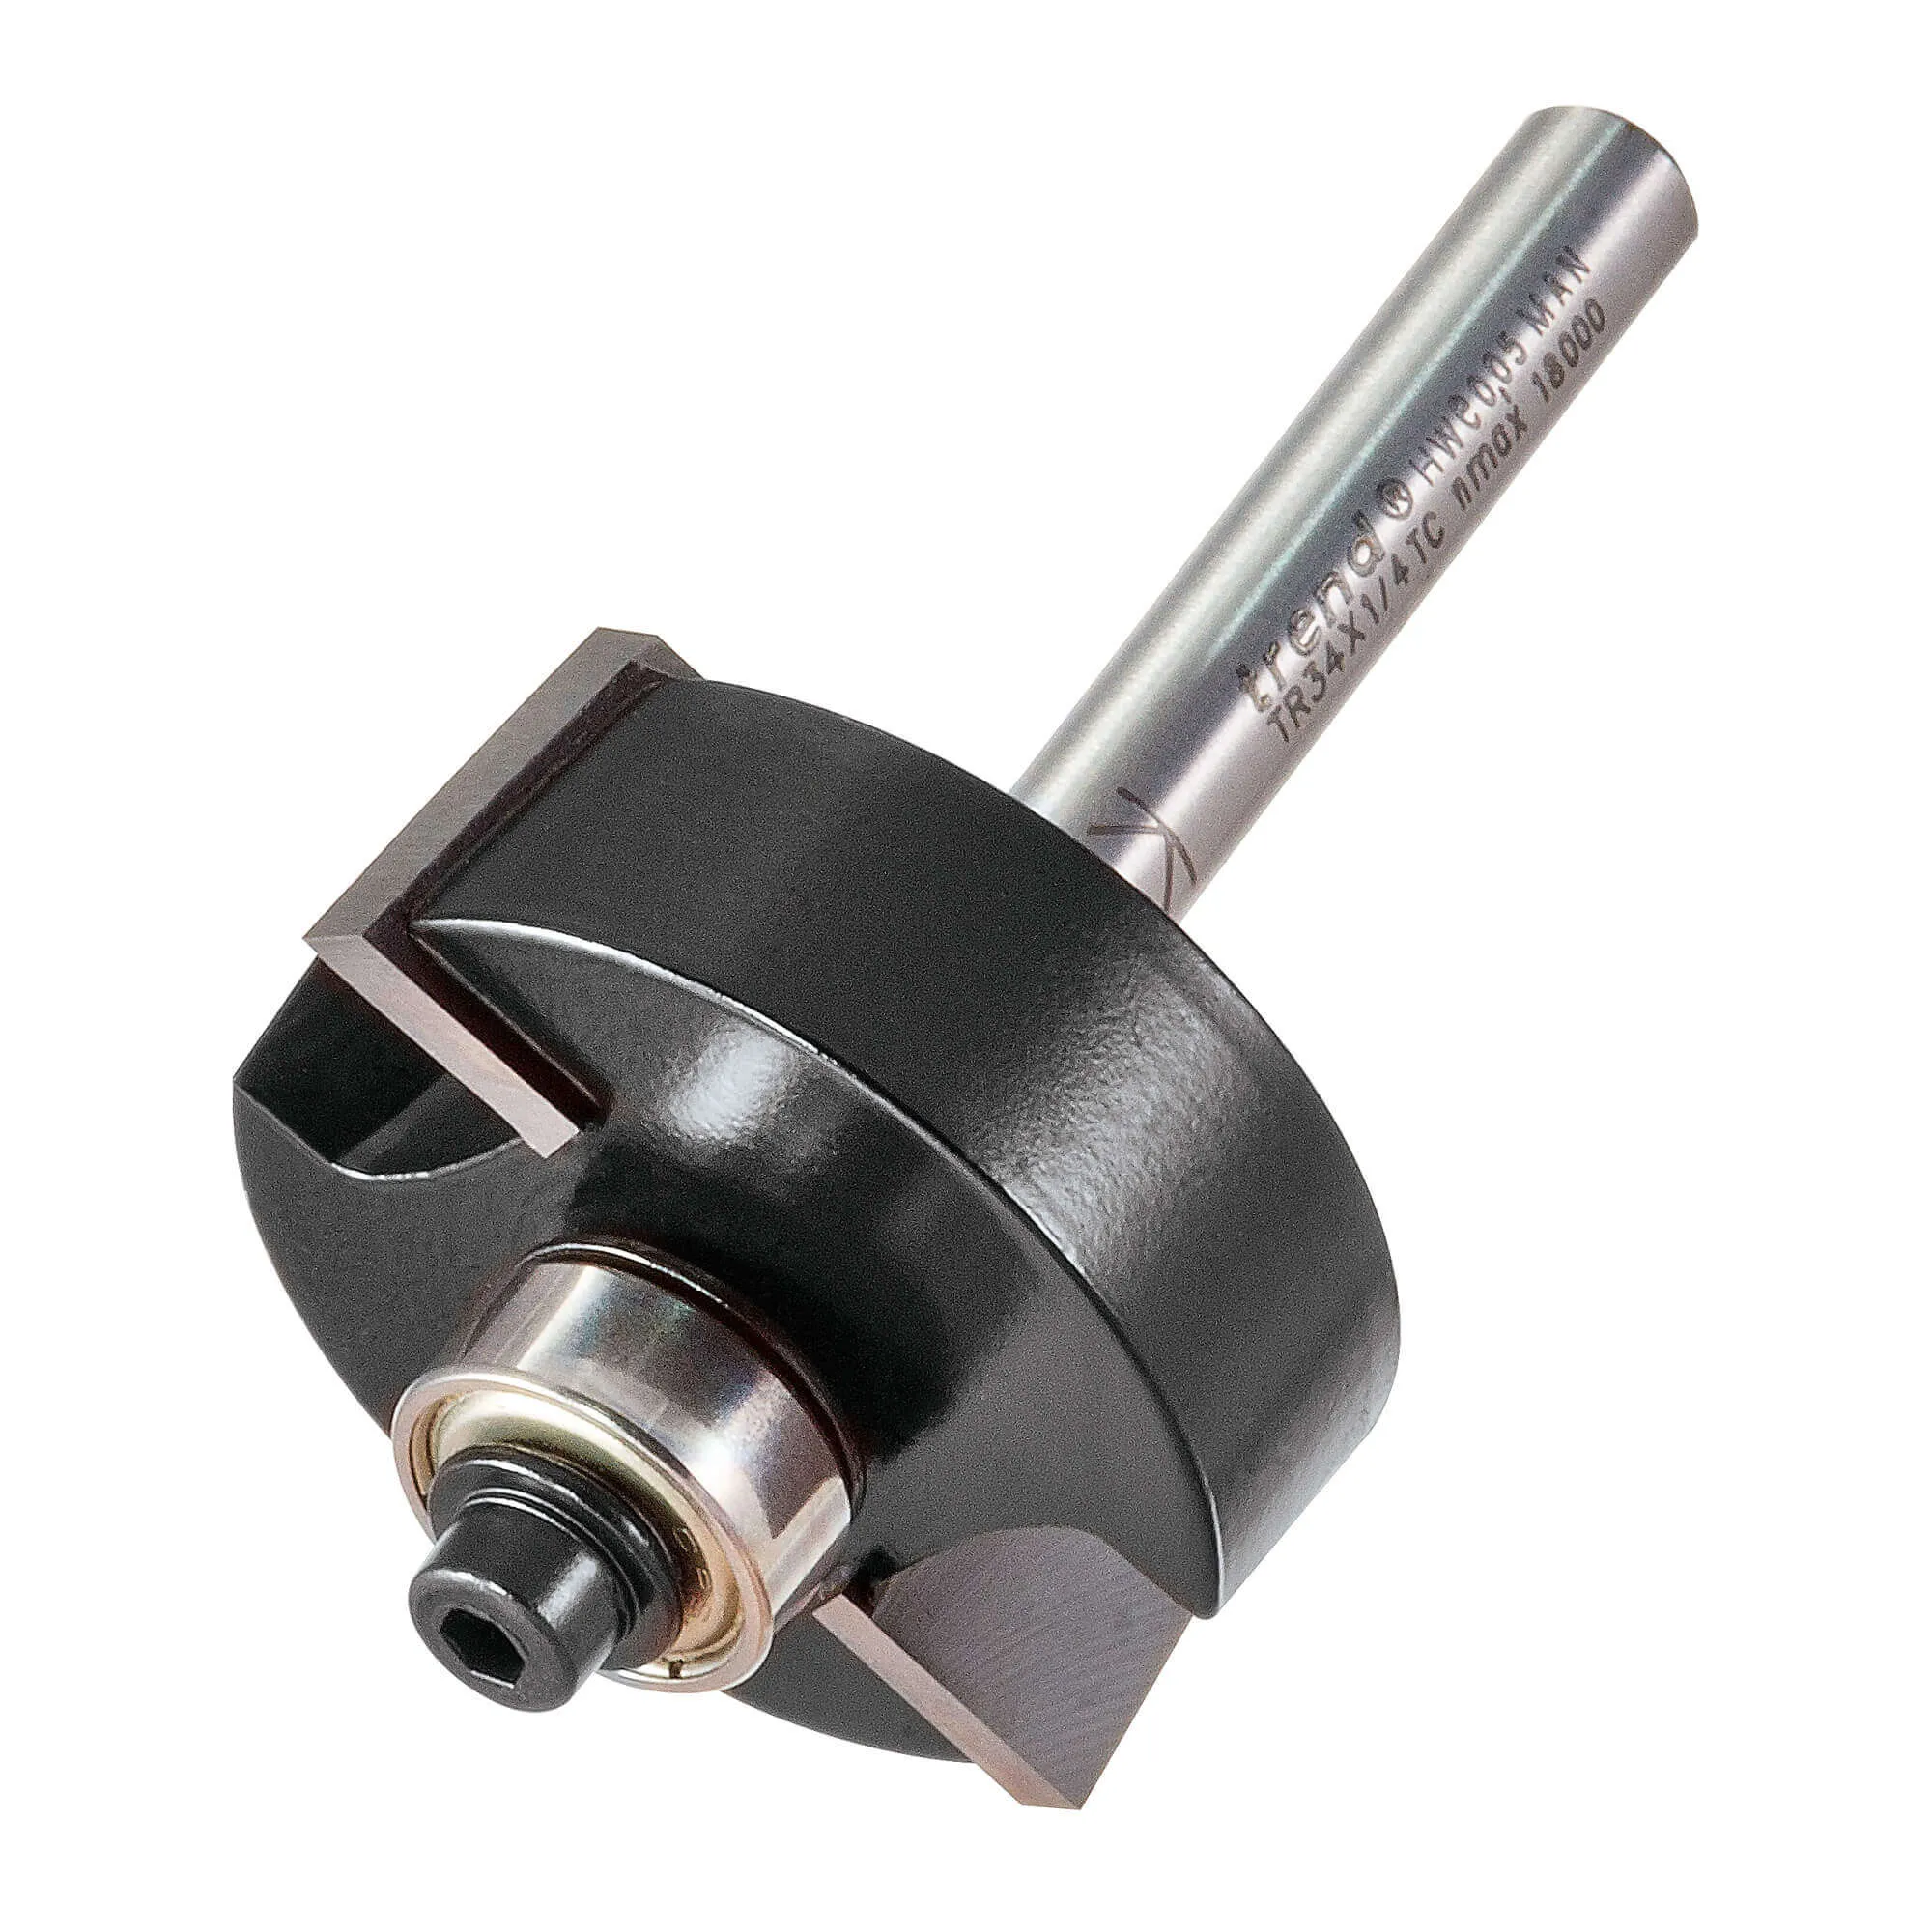 Trend TRADE RANGE Bearing Guided Rebater Router Cutter - 35mm, 1/4"